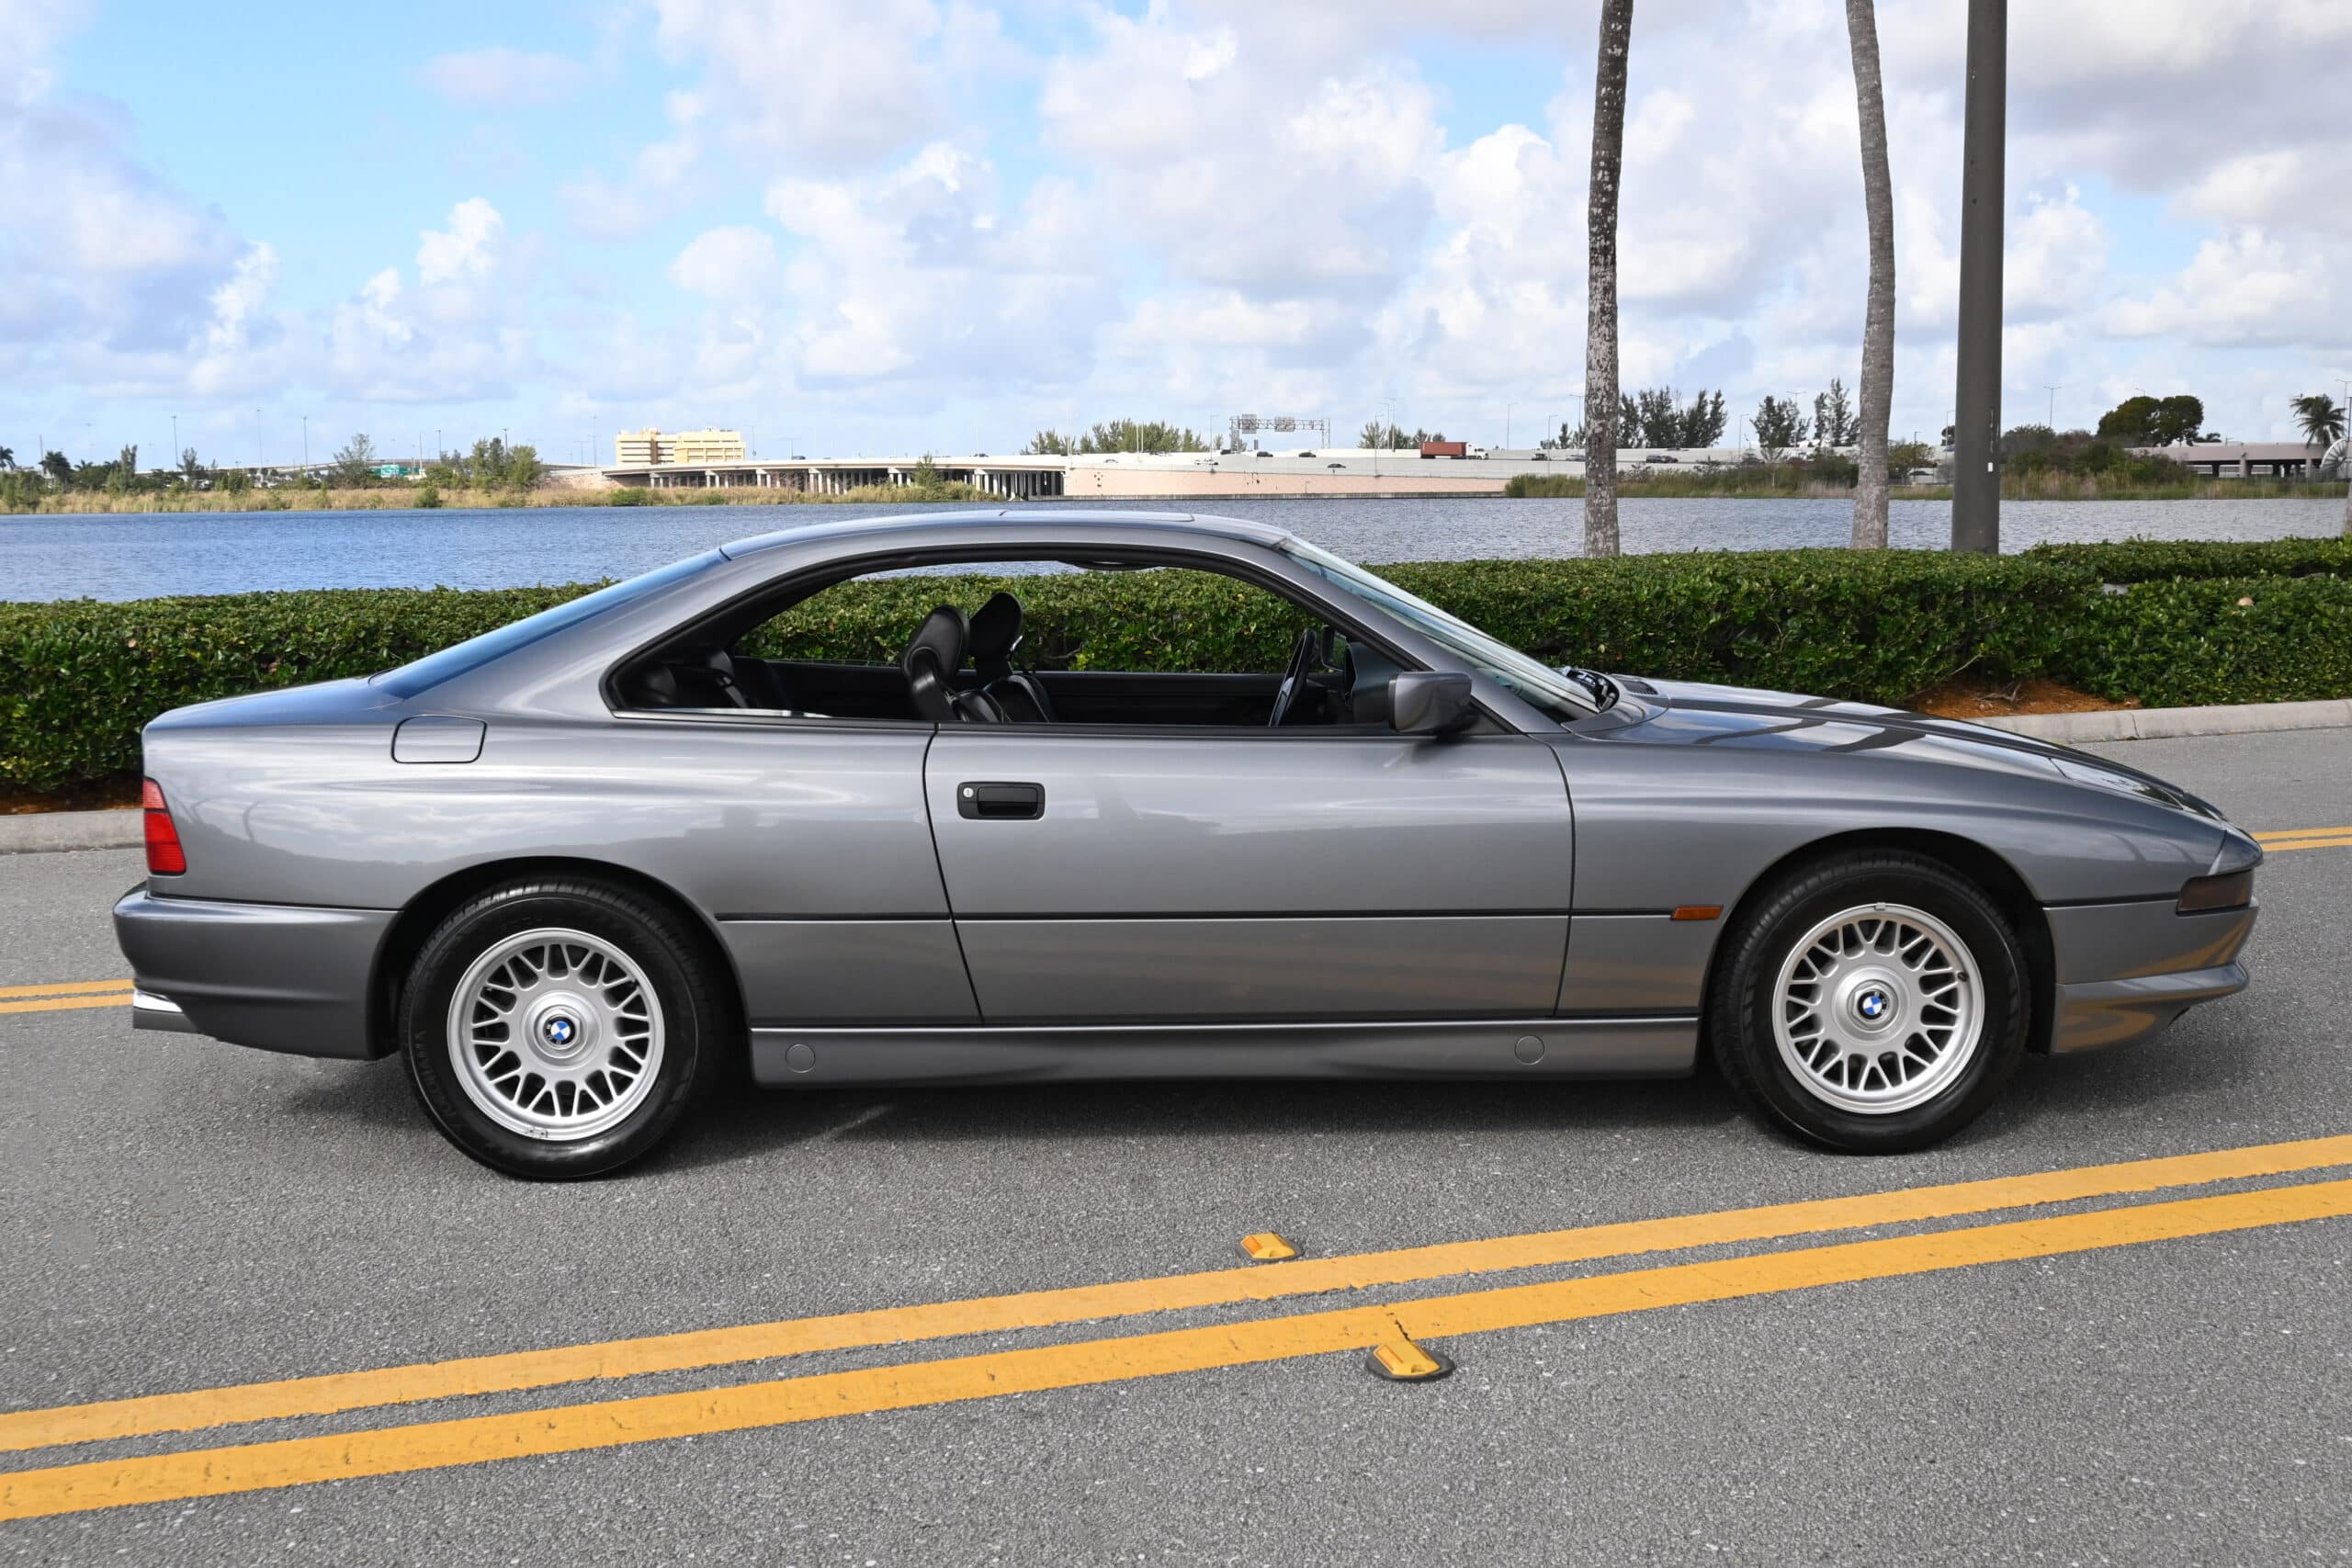 1991 BMW 850i, rare 6-speed, RoW vehicle, one of 427 Granite Silver E31s ever made, Sports Exhaust, cold A/C